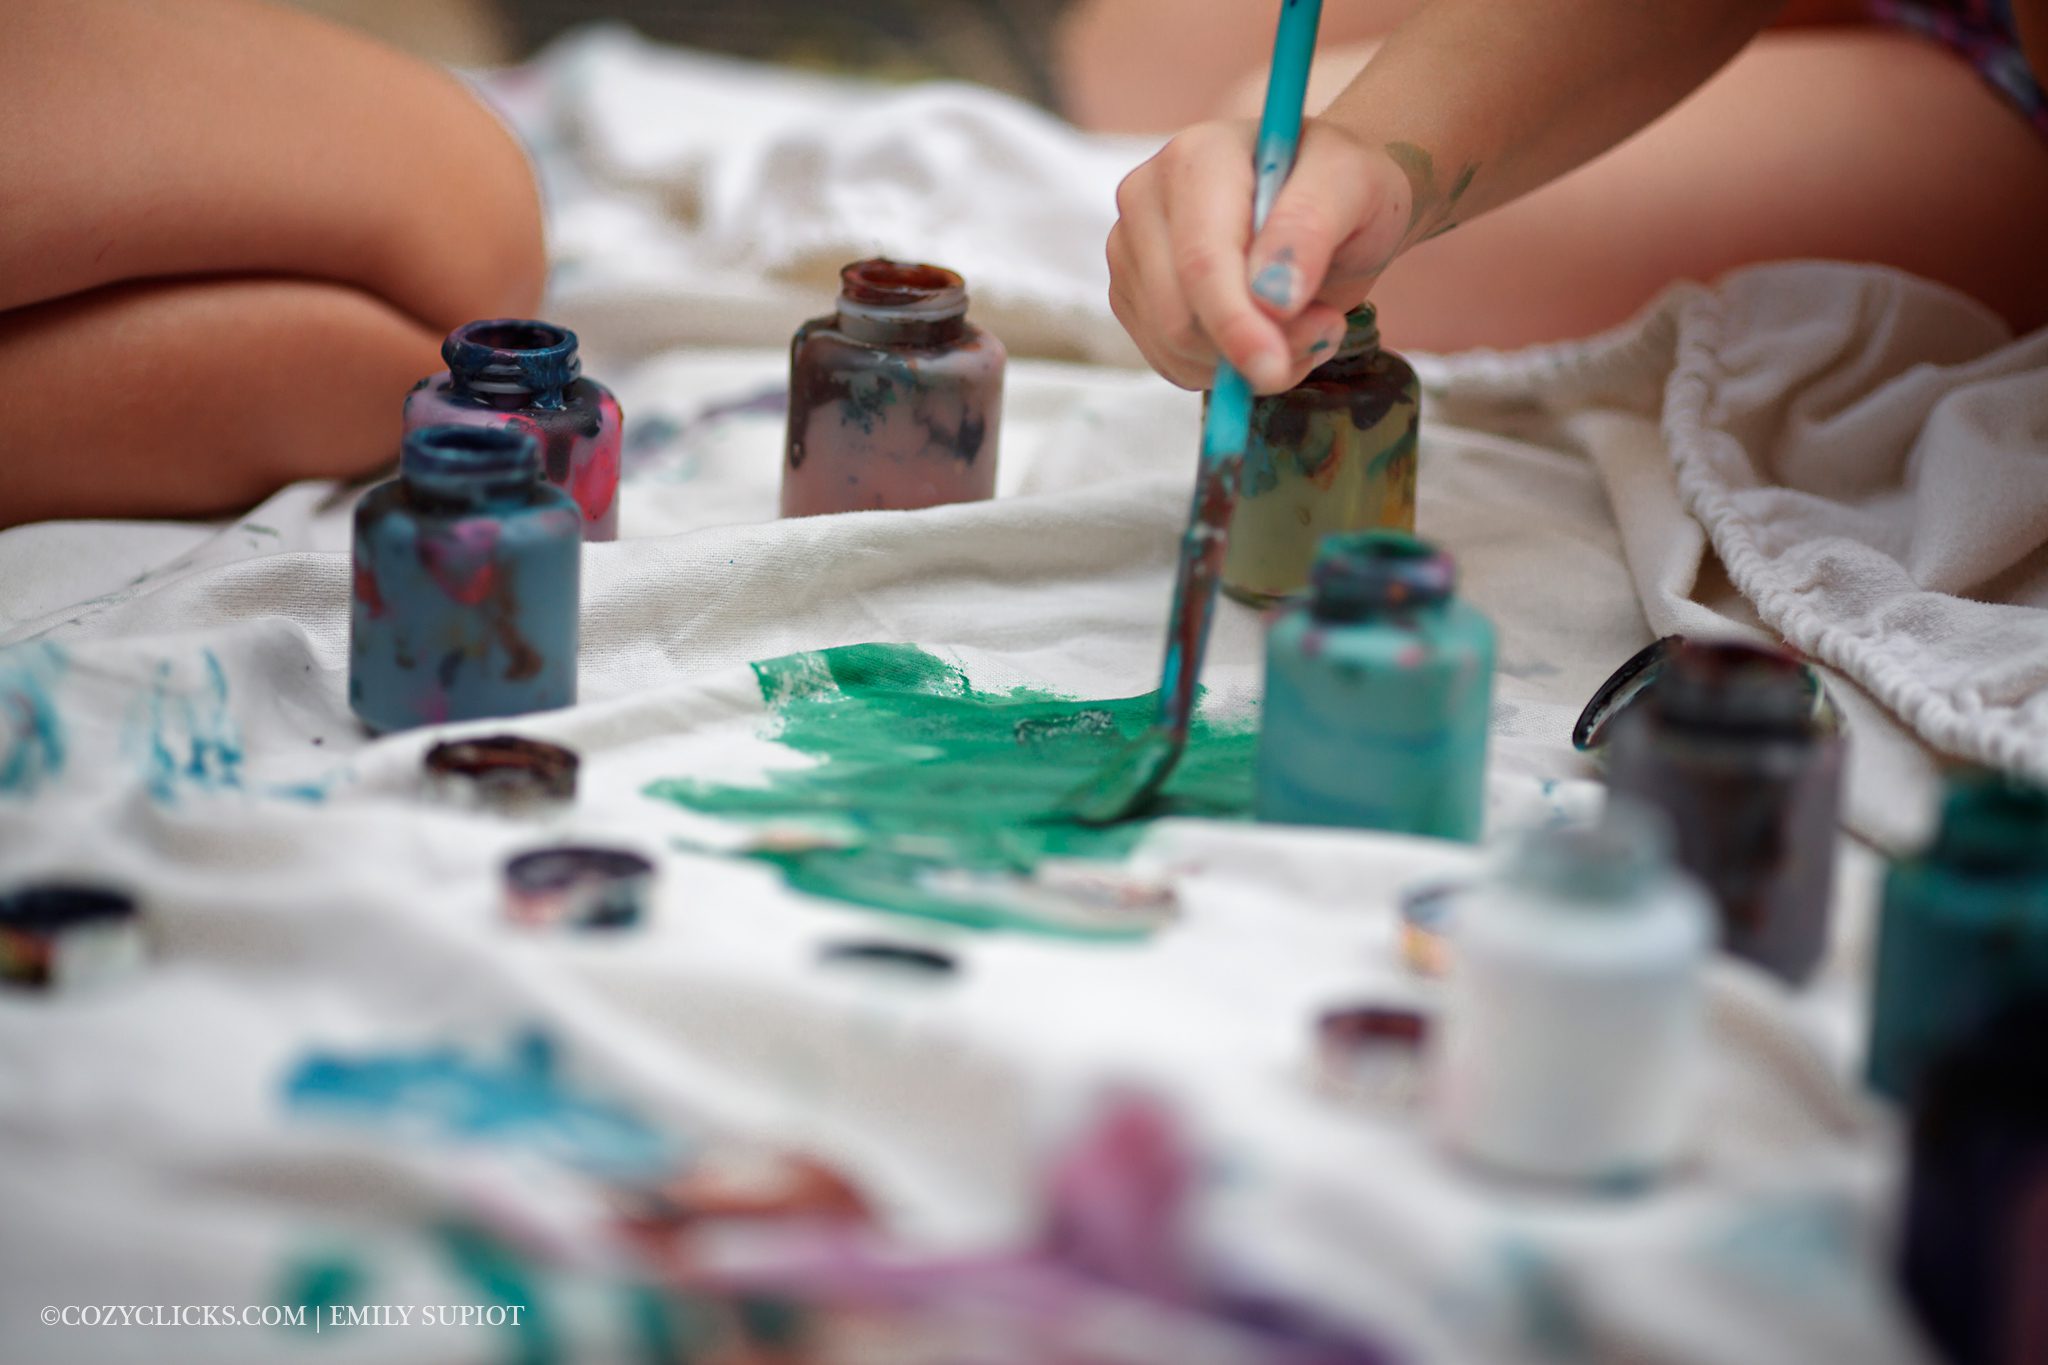 Little painters try not to get too messy in this photograph